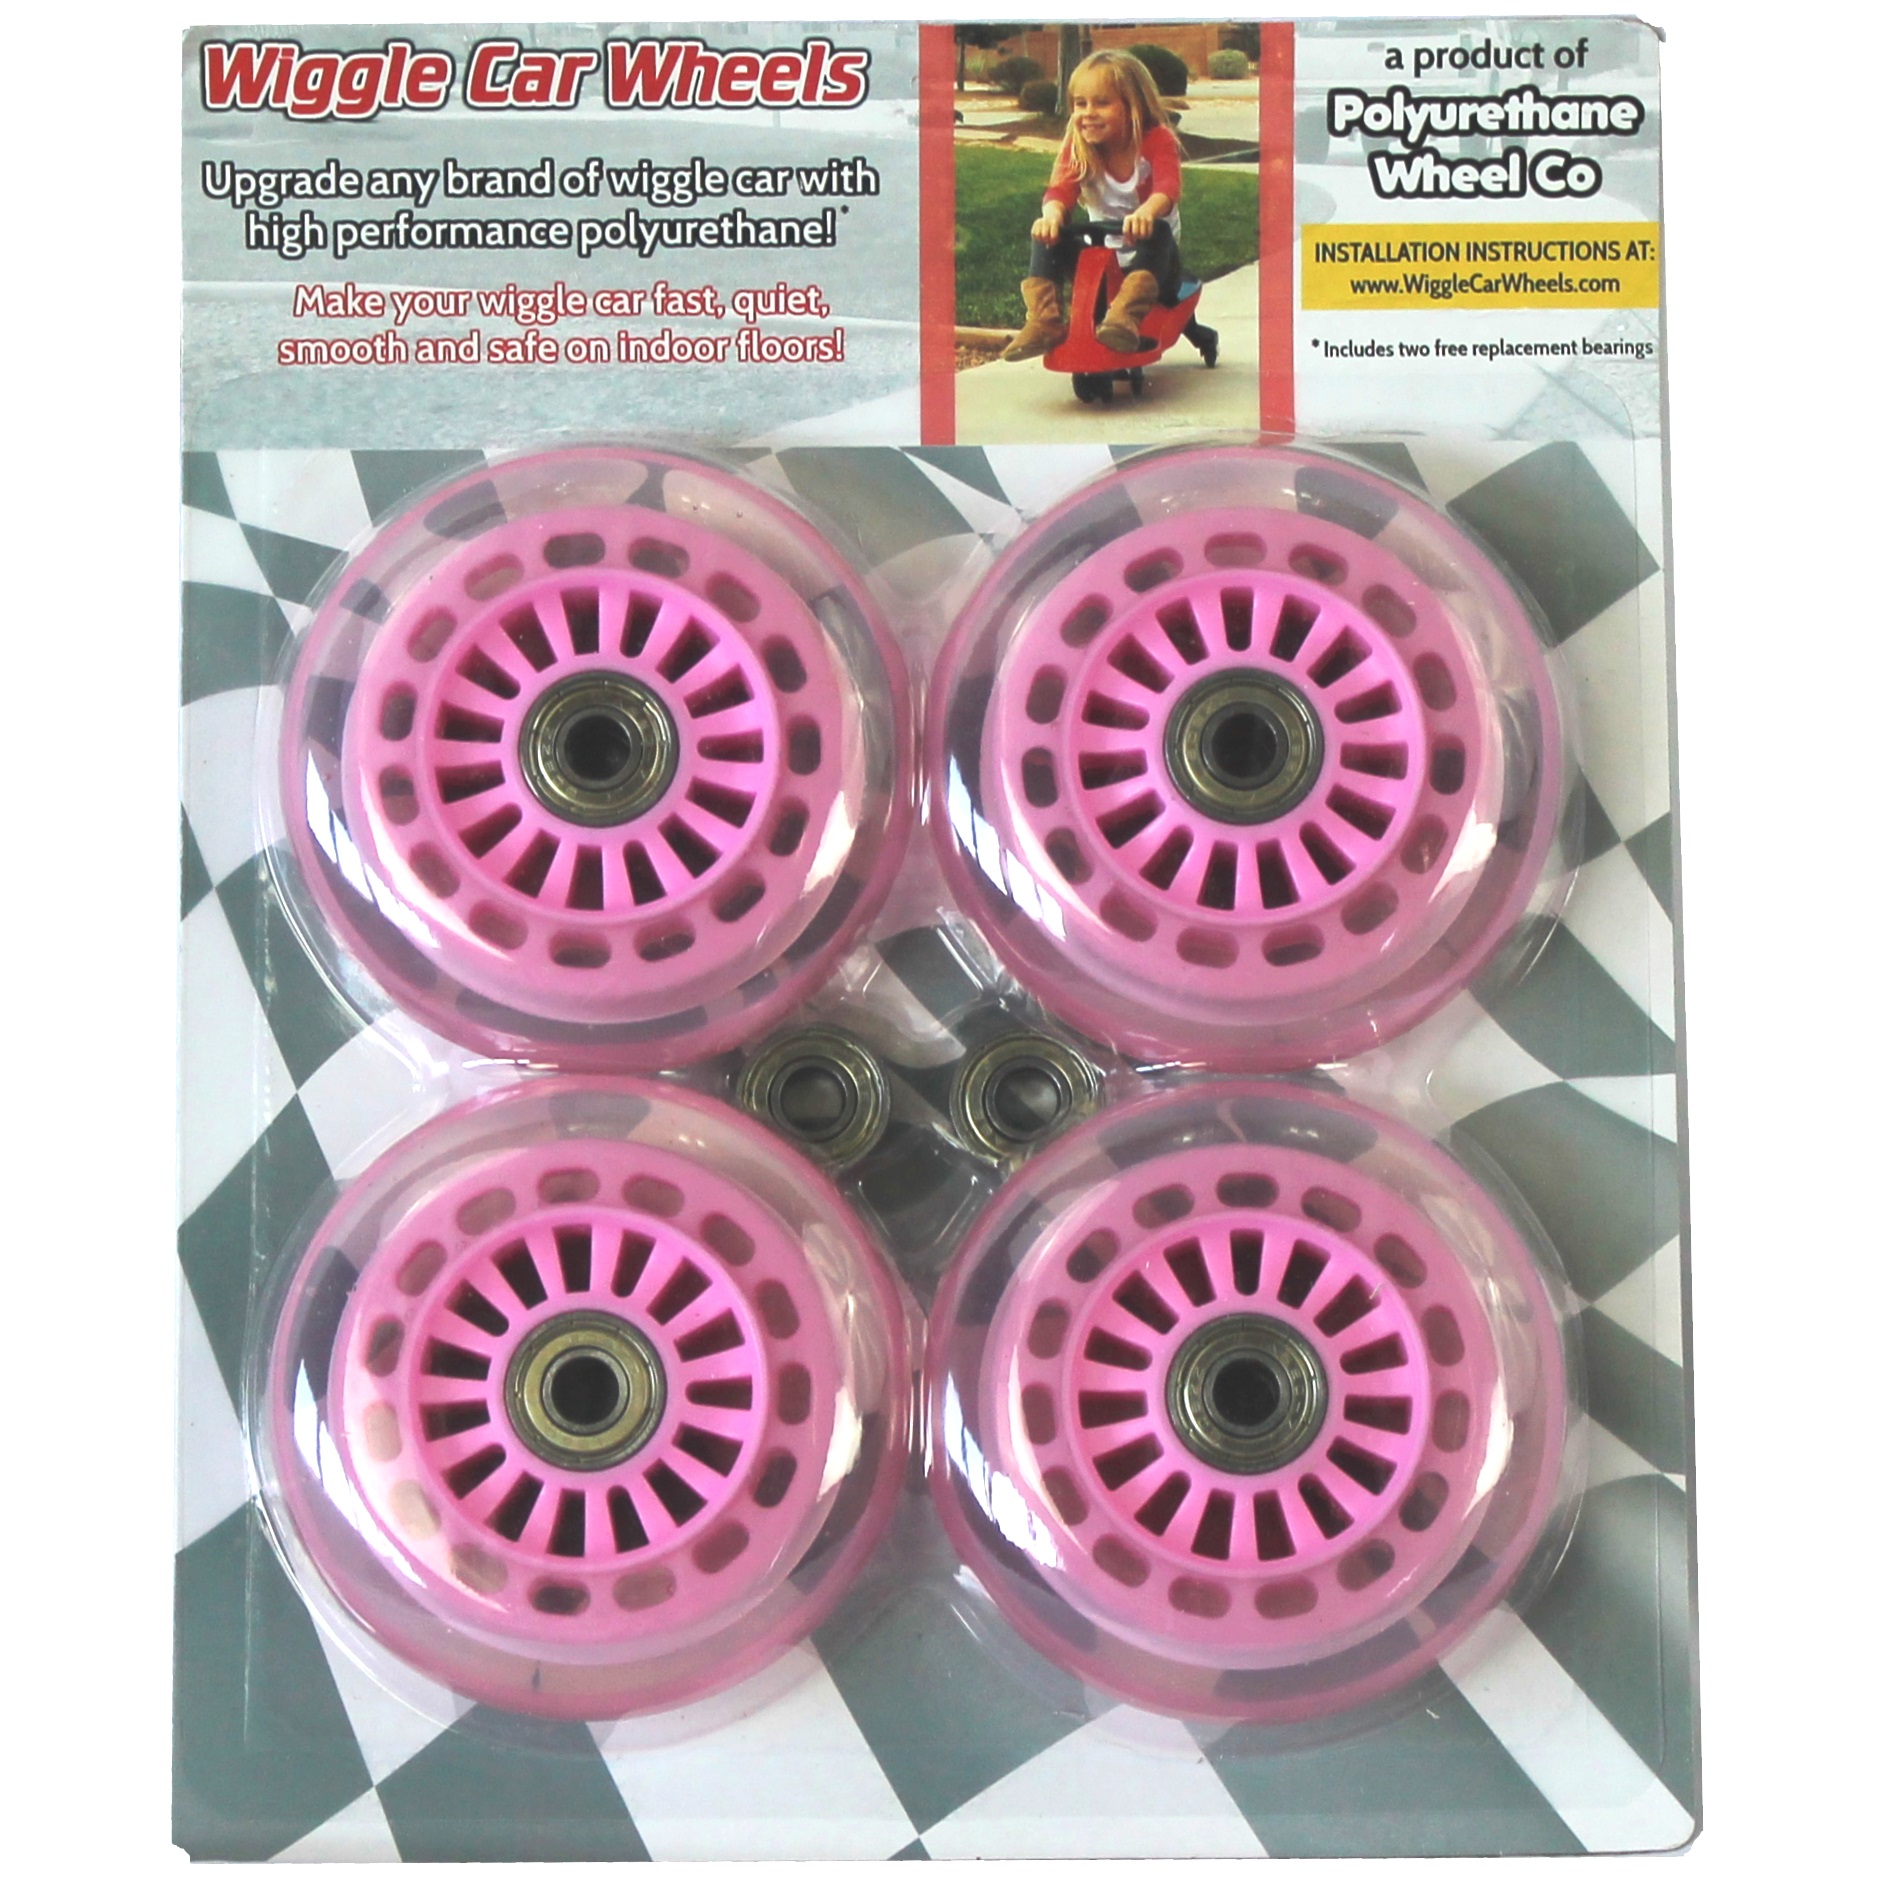 Wiggle Car Polyurethane Replacement Wheels Set Black Swing Car Tires Pack Upgrade for Original Plasma Car Front,2P Light Up Lil Rider Ride-on Toys Rear,2P Narrower 